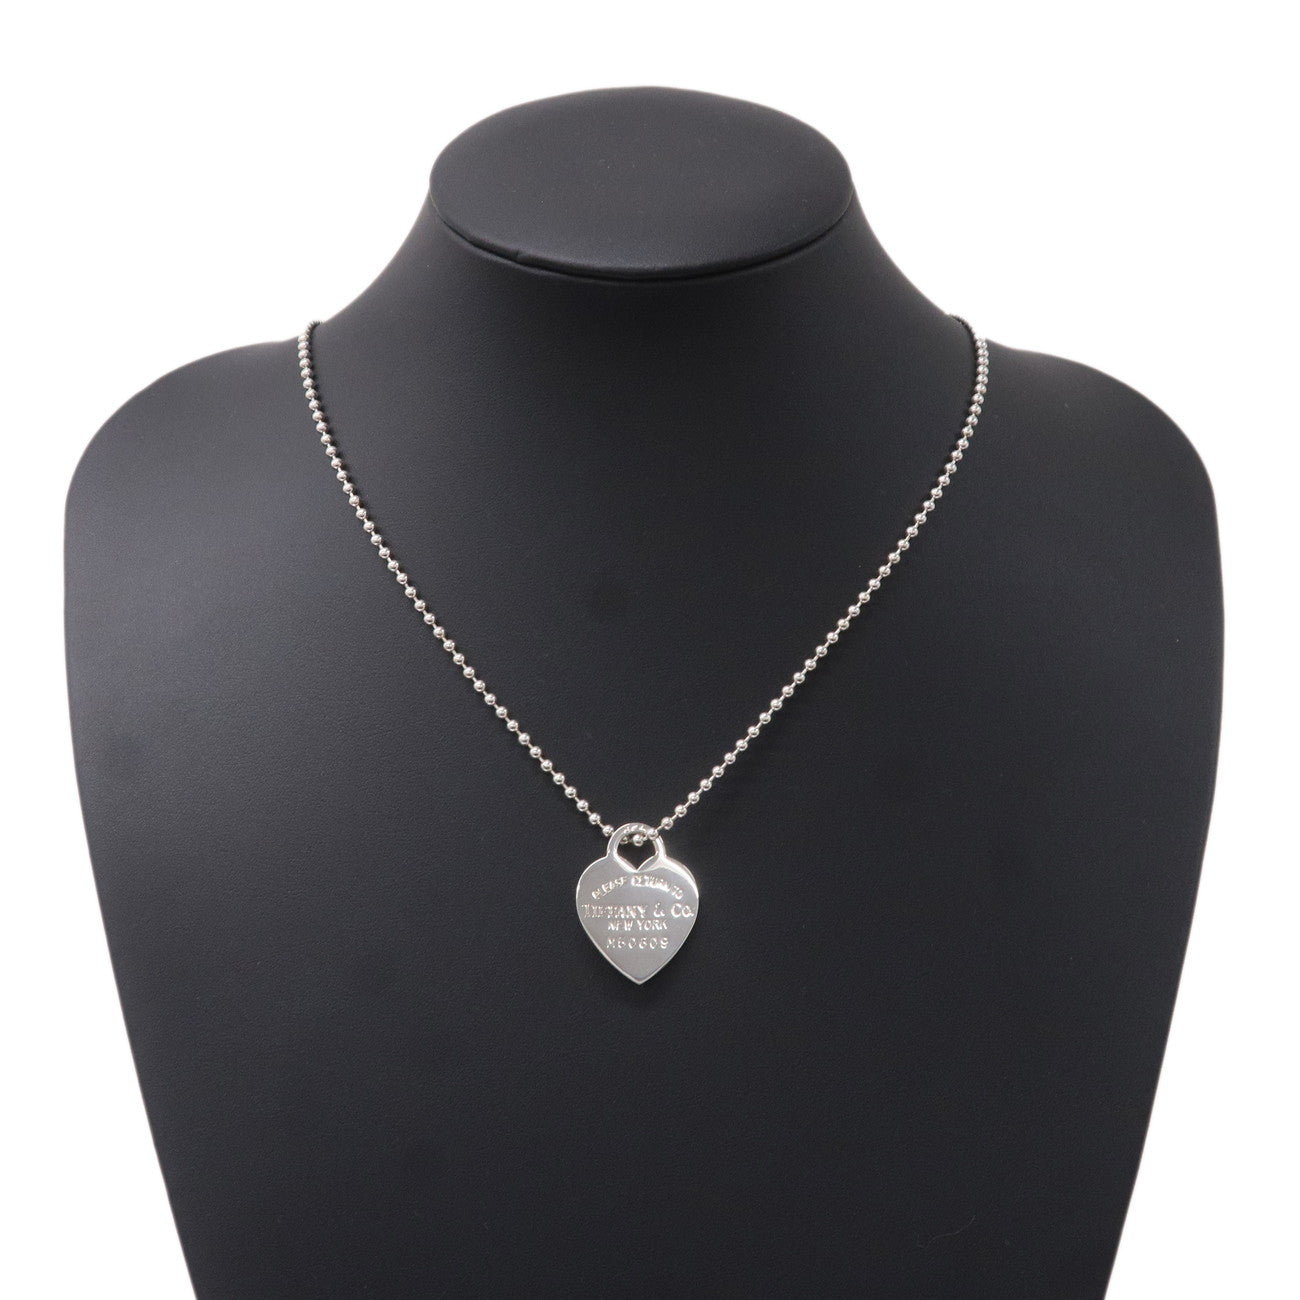 At Auction: Tiffany & Co Return to Tiffany Sterling Heart Tag Pendant  Necklace